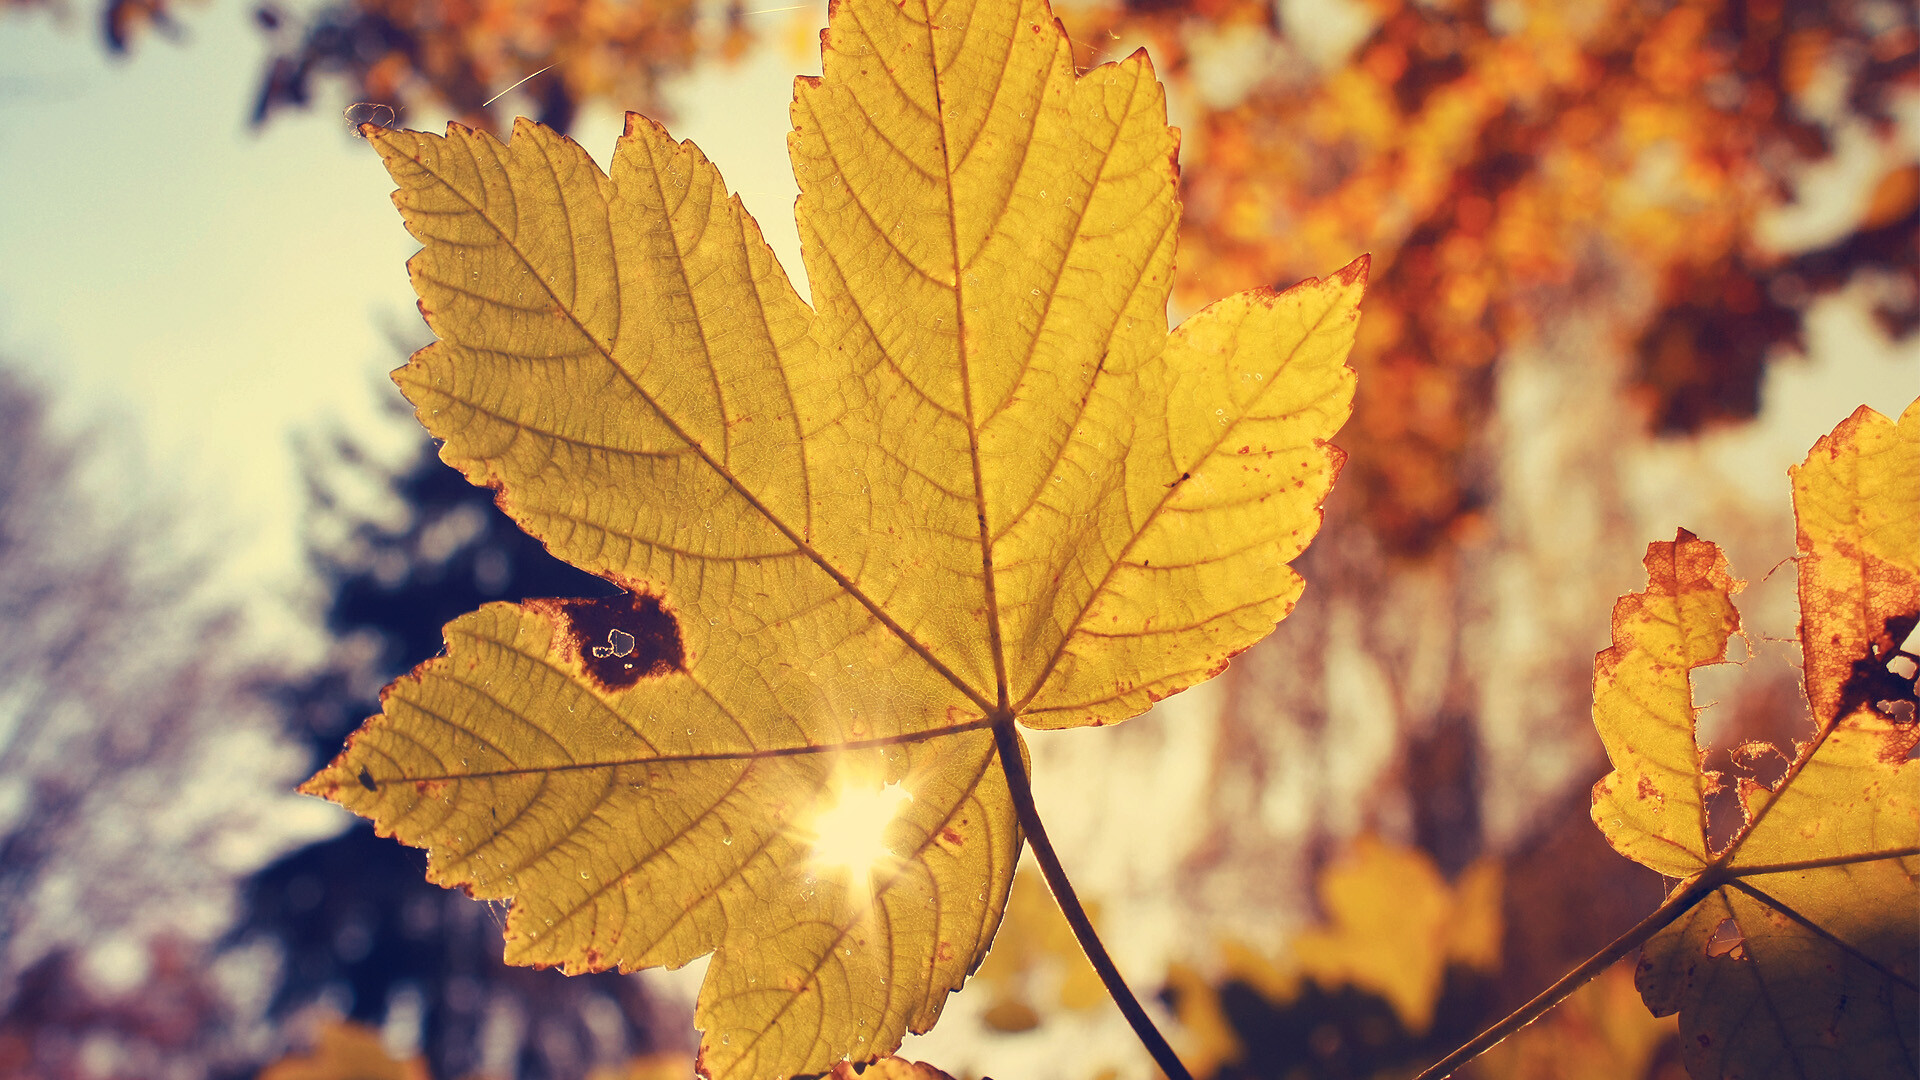 Gold Leaf: Light shining through autumn foliage, The veins of leaves, Maple, Acer pseudoplatanus. 1920x1080 Full HD Wallpaper.